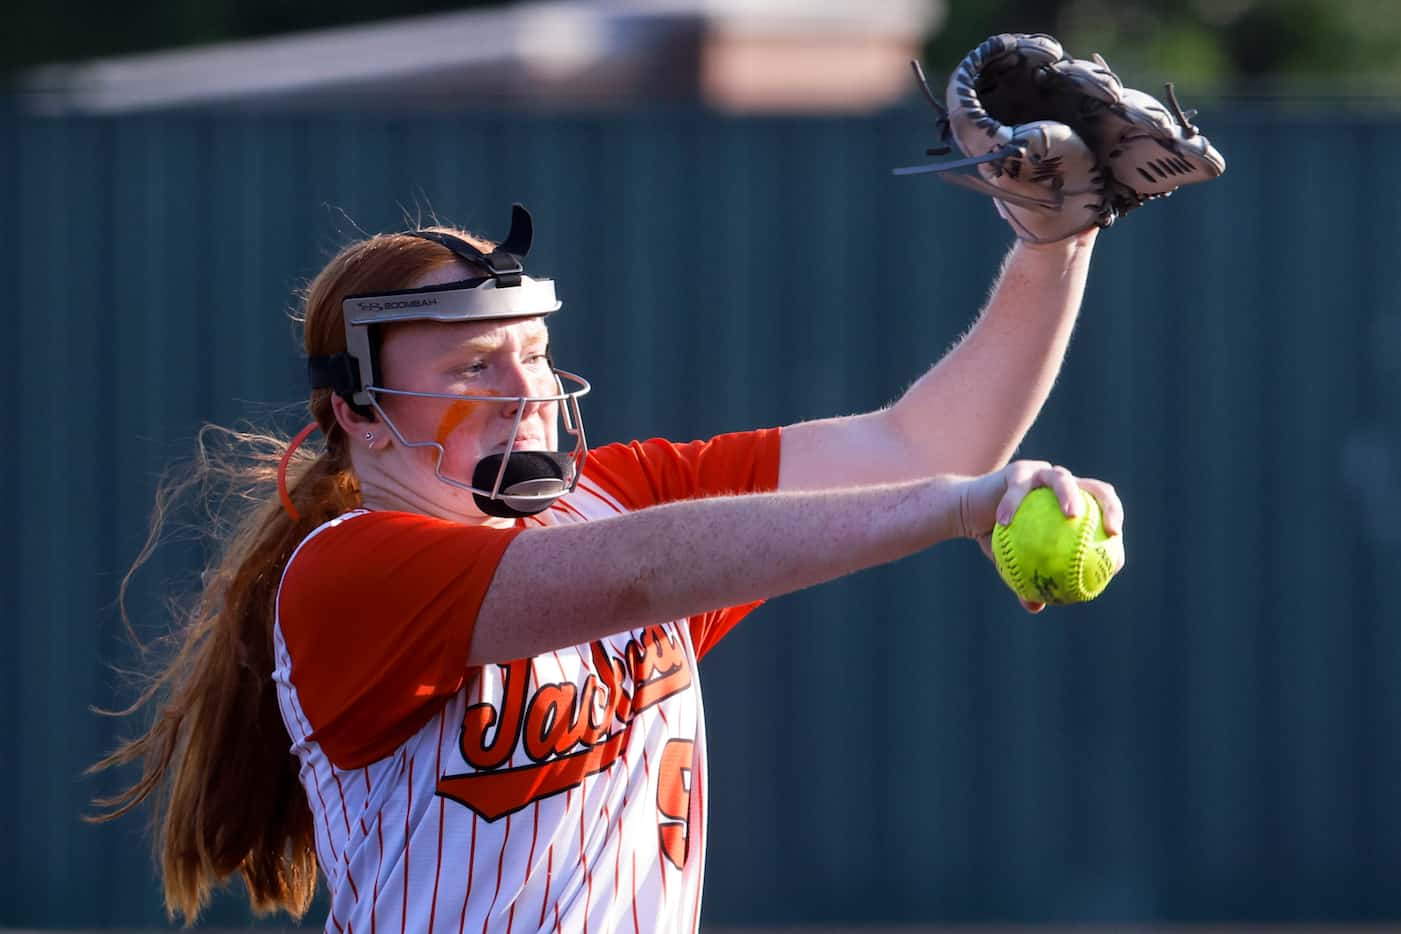 Rockwall’s Ainsley Pemberton pitches during the first inning of a softball game against...